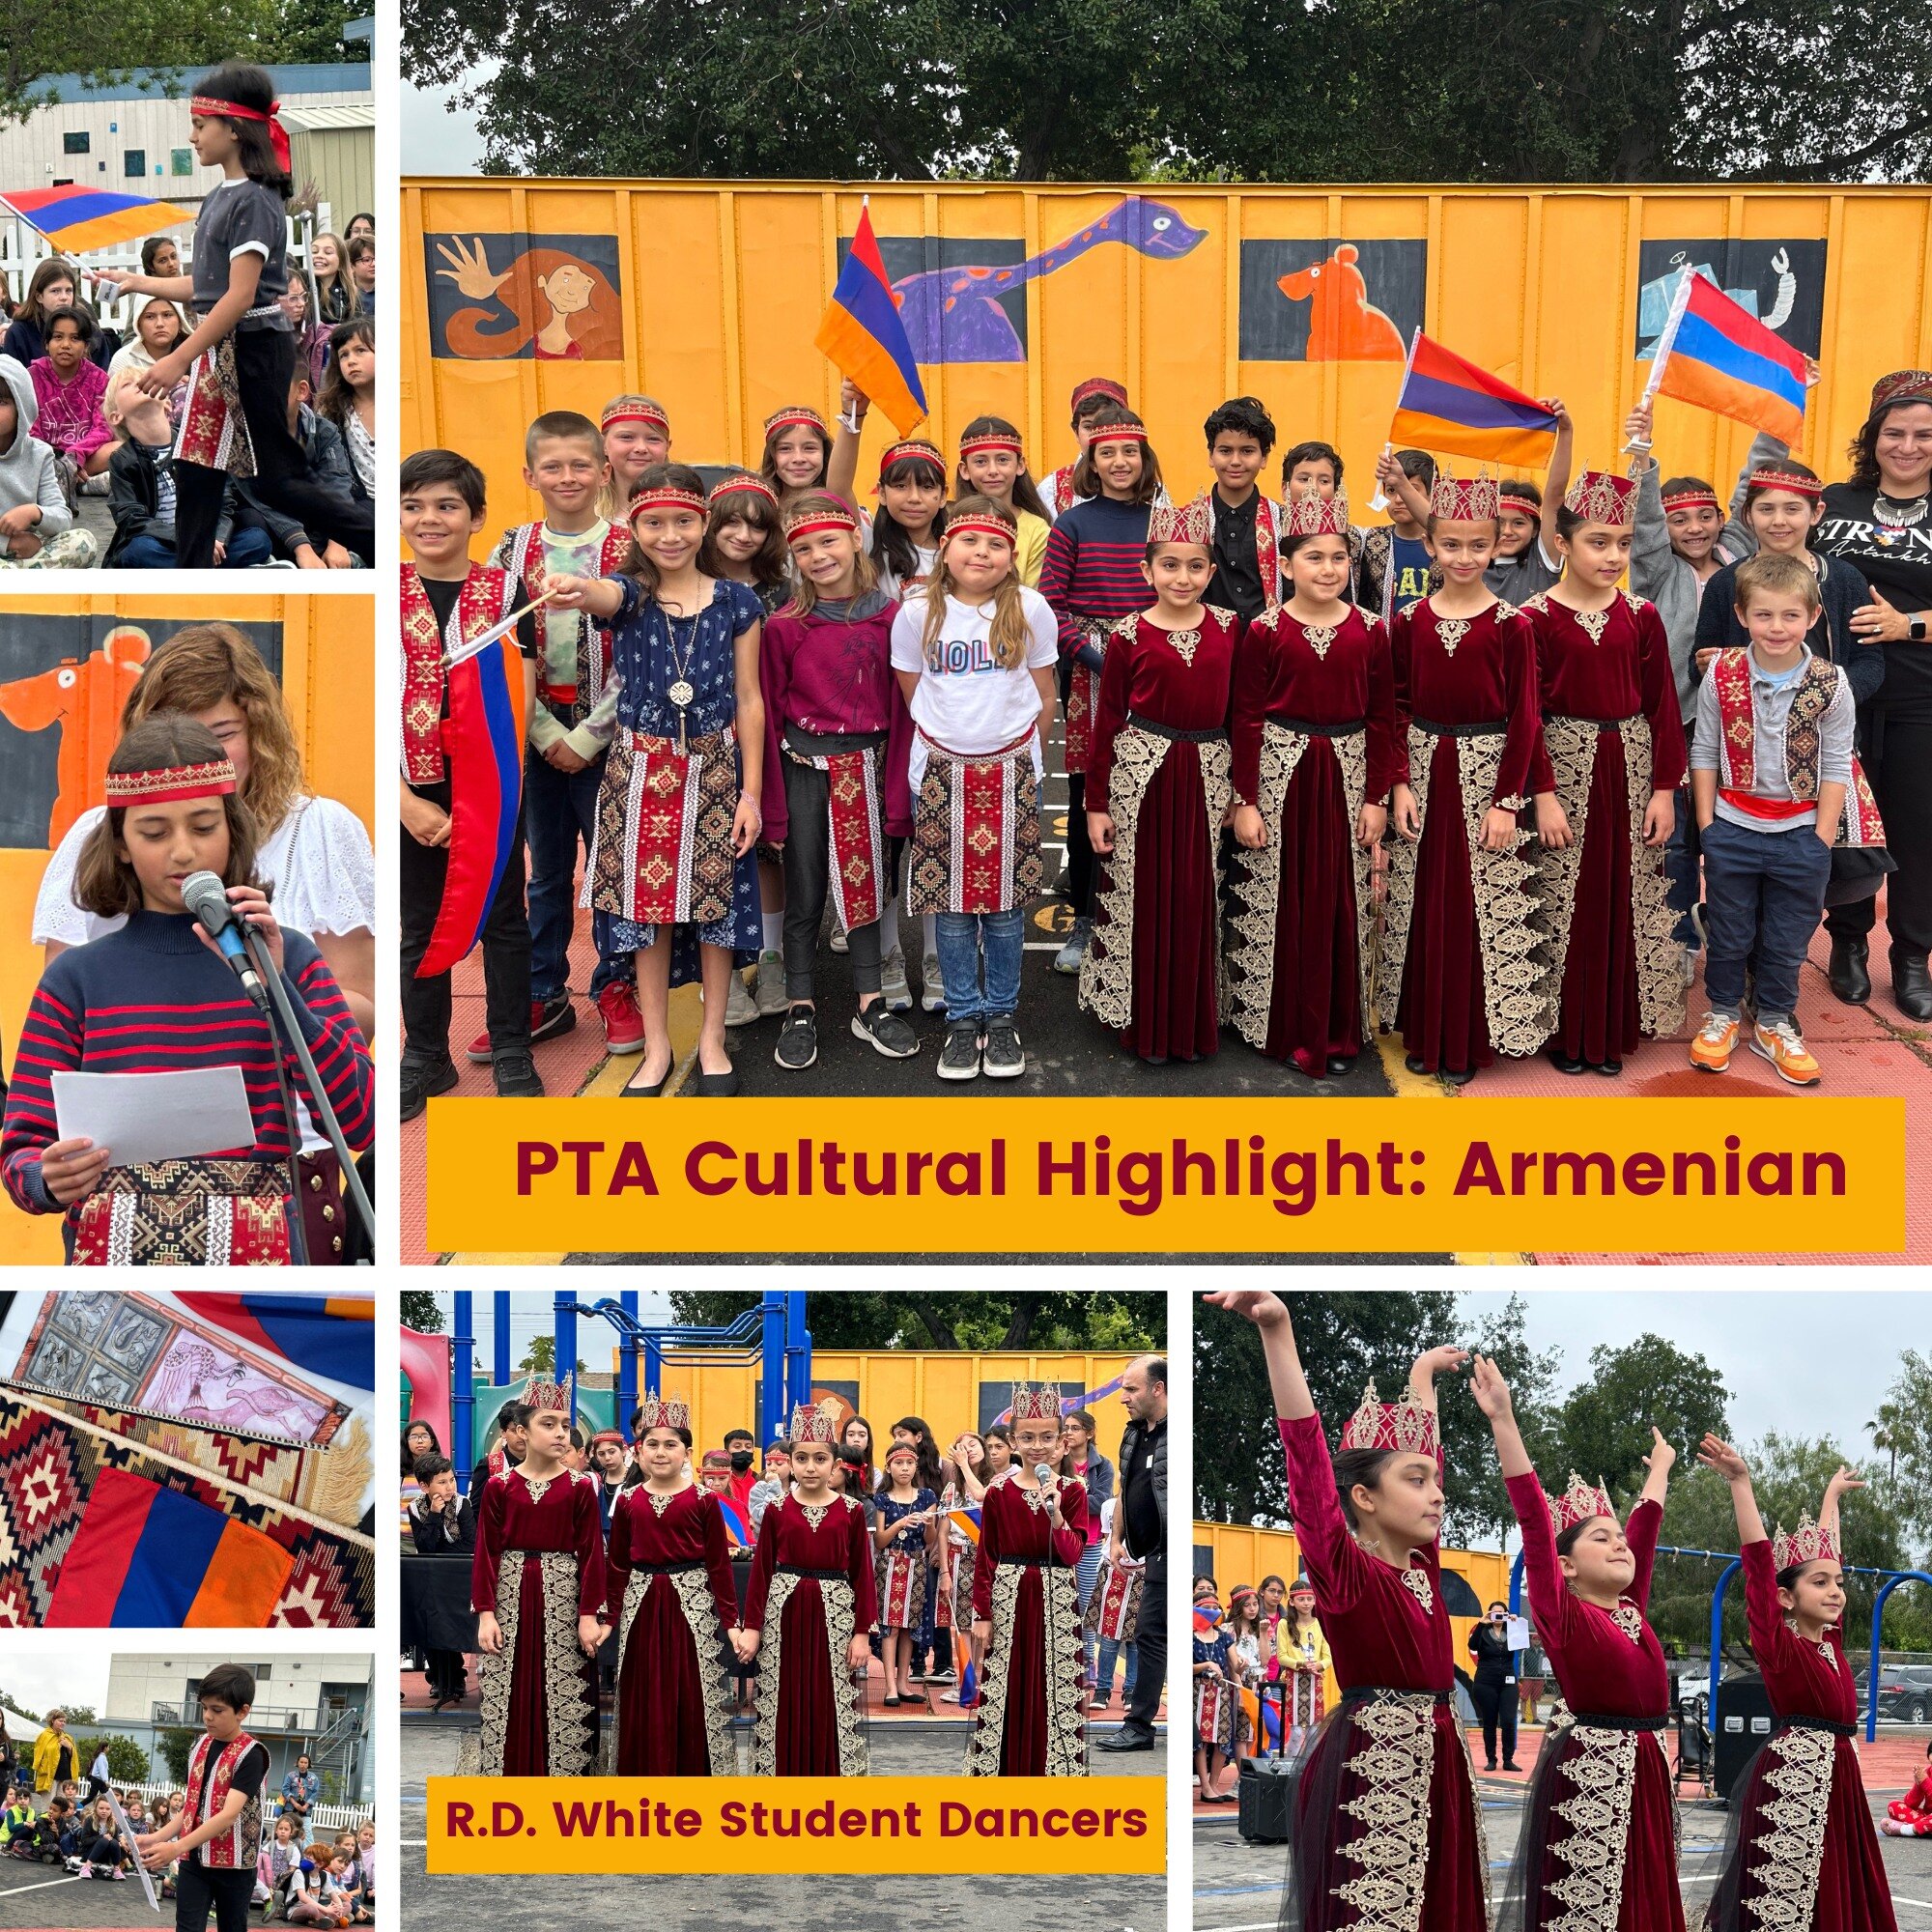 Franklin welcomed student performers from R.D. White Elementary. They performed a medley of Armenian dances and songs for our PTA Armenian Cultural Highlight. Franklin parents and students presented stories and the history of Armenian culture.